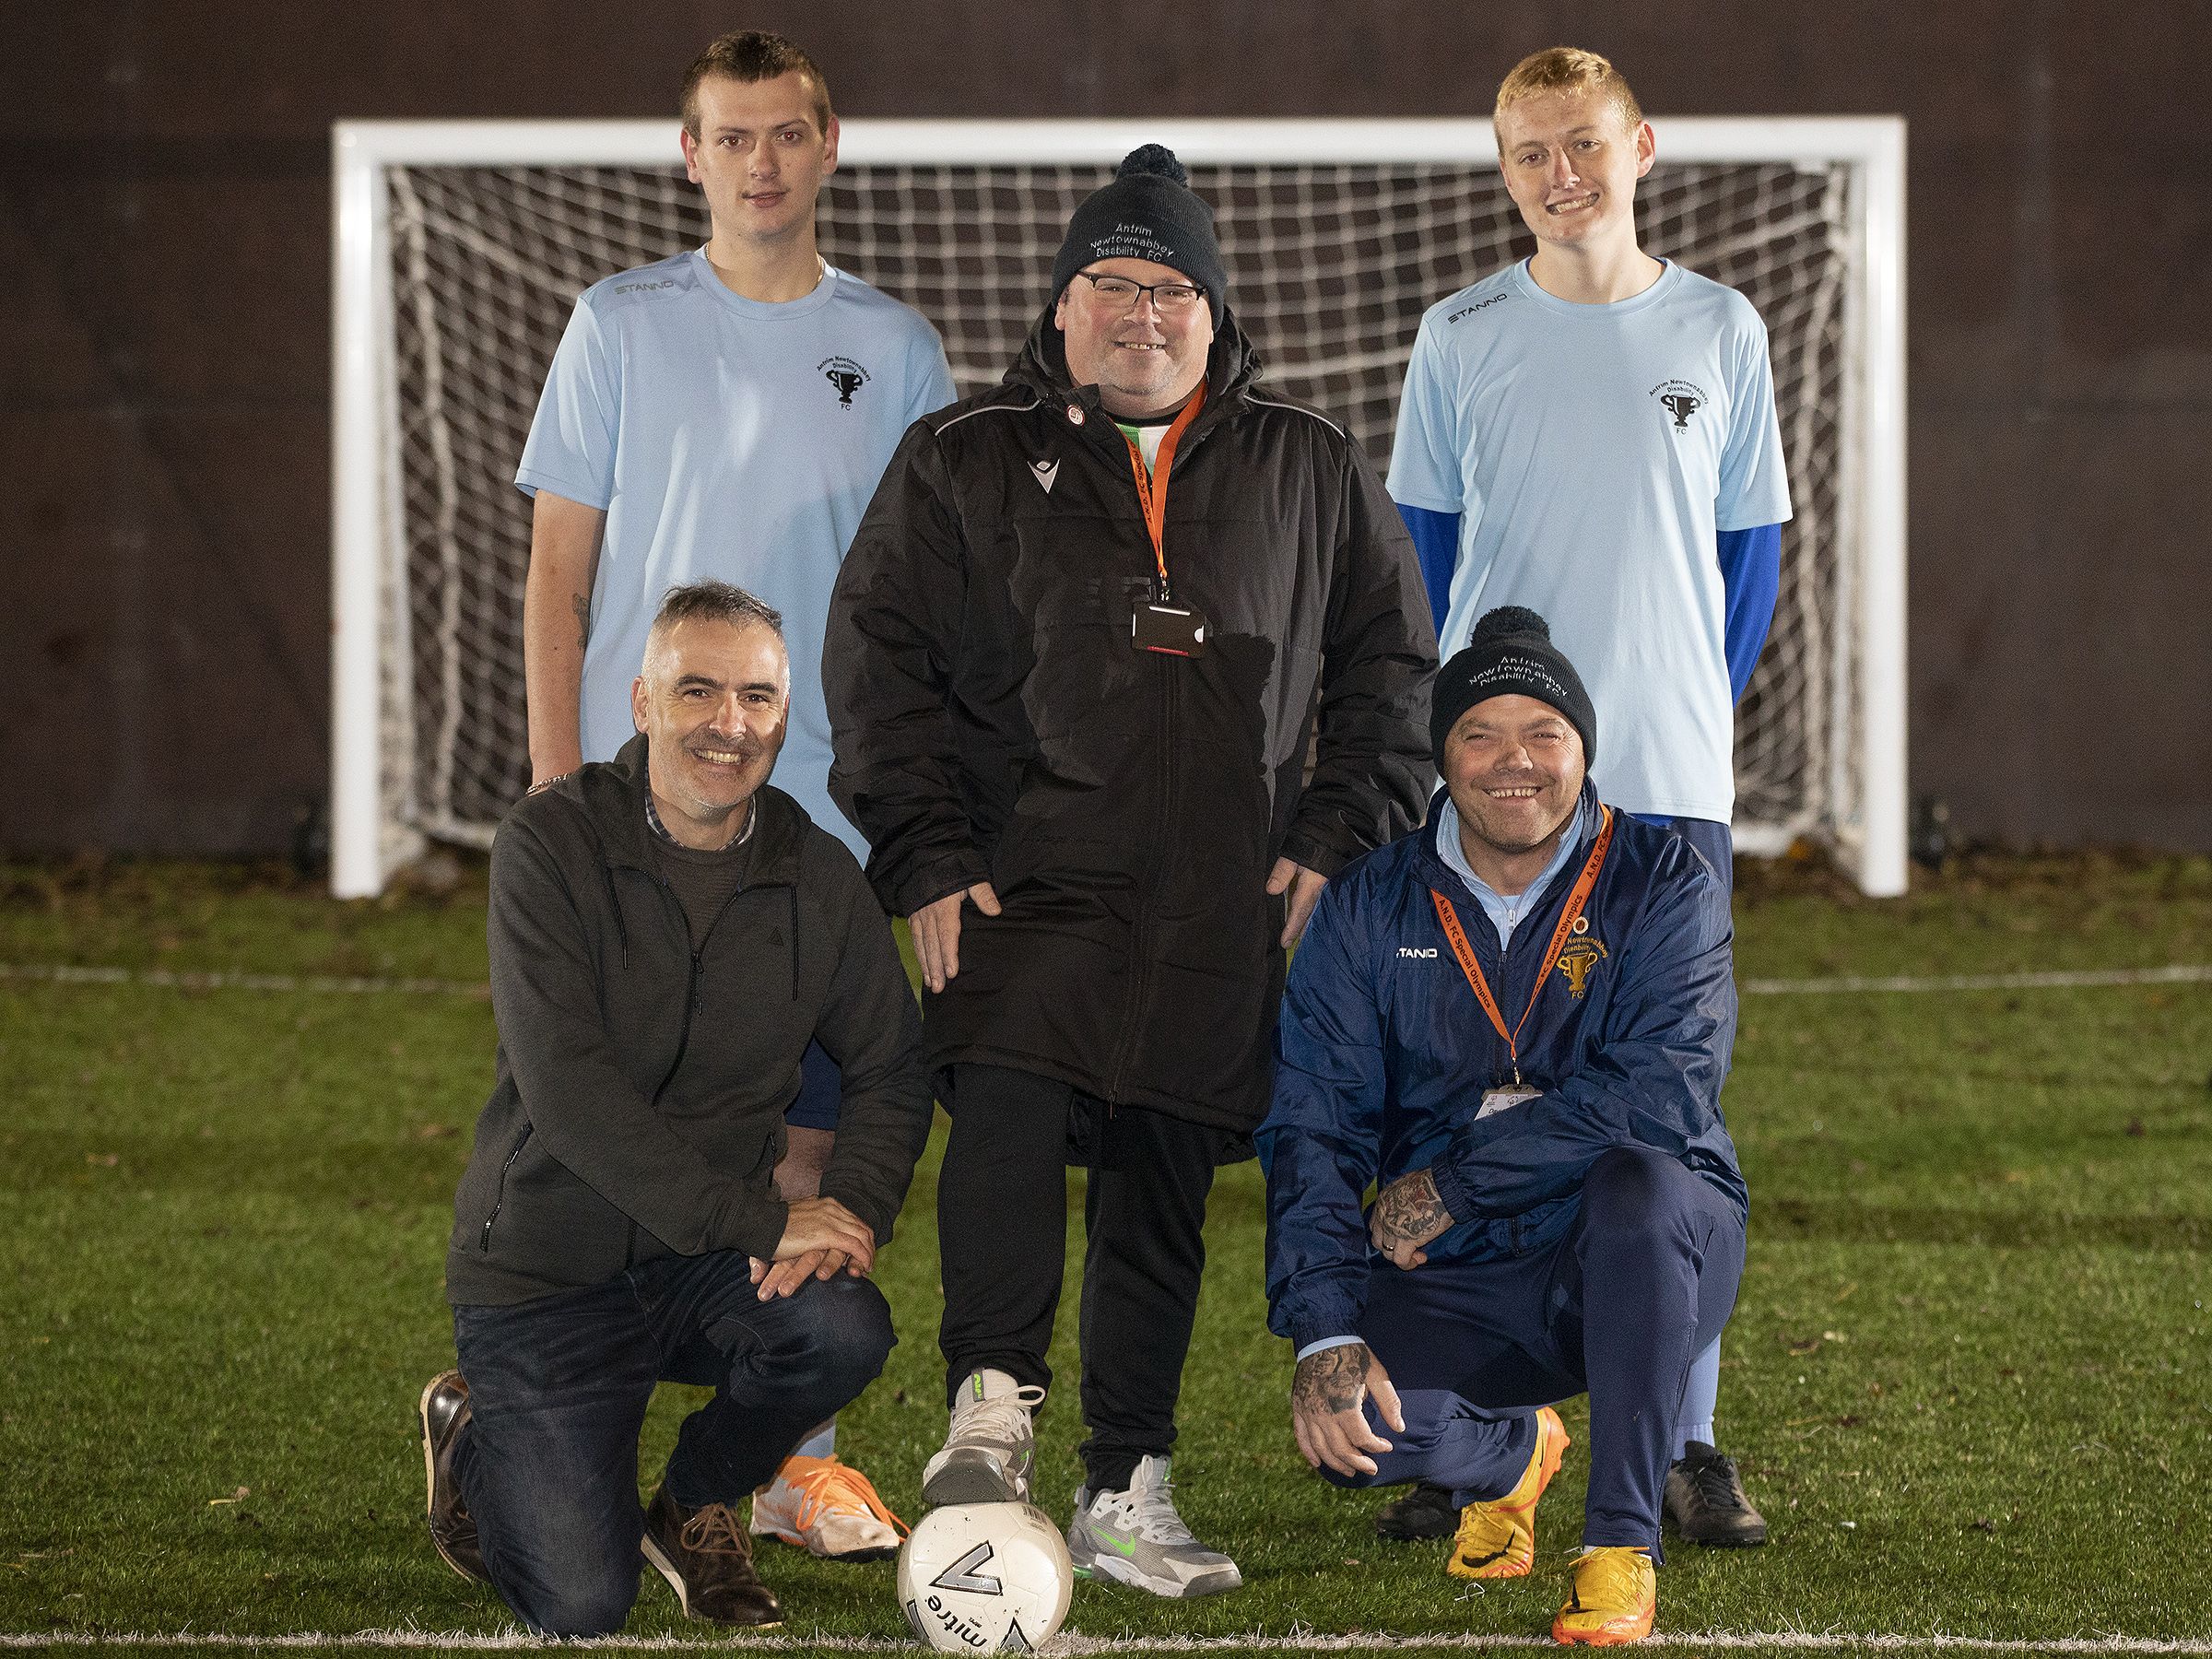 Jamie Bishop Evans and Jay Olphert, Antrim and Newtownabbey Disability Football Club athletes, with Jim McCracken, Shaun Cassidy and Dave Seawright